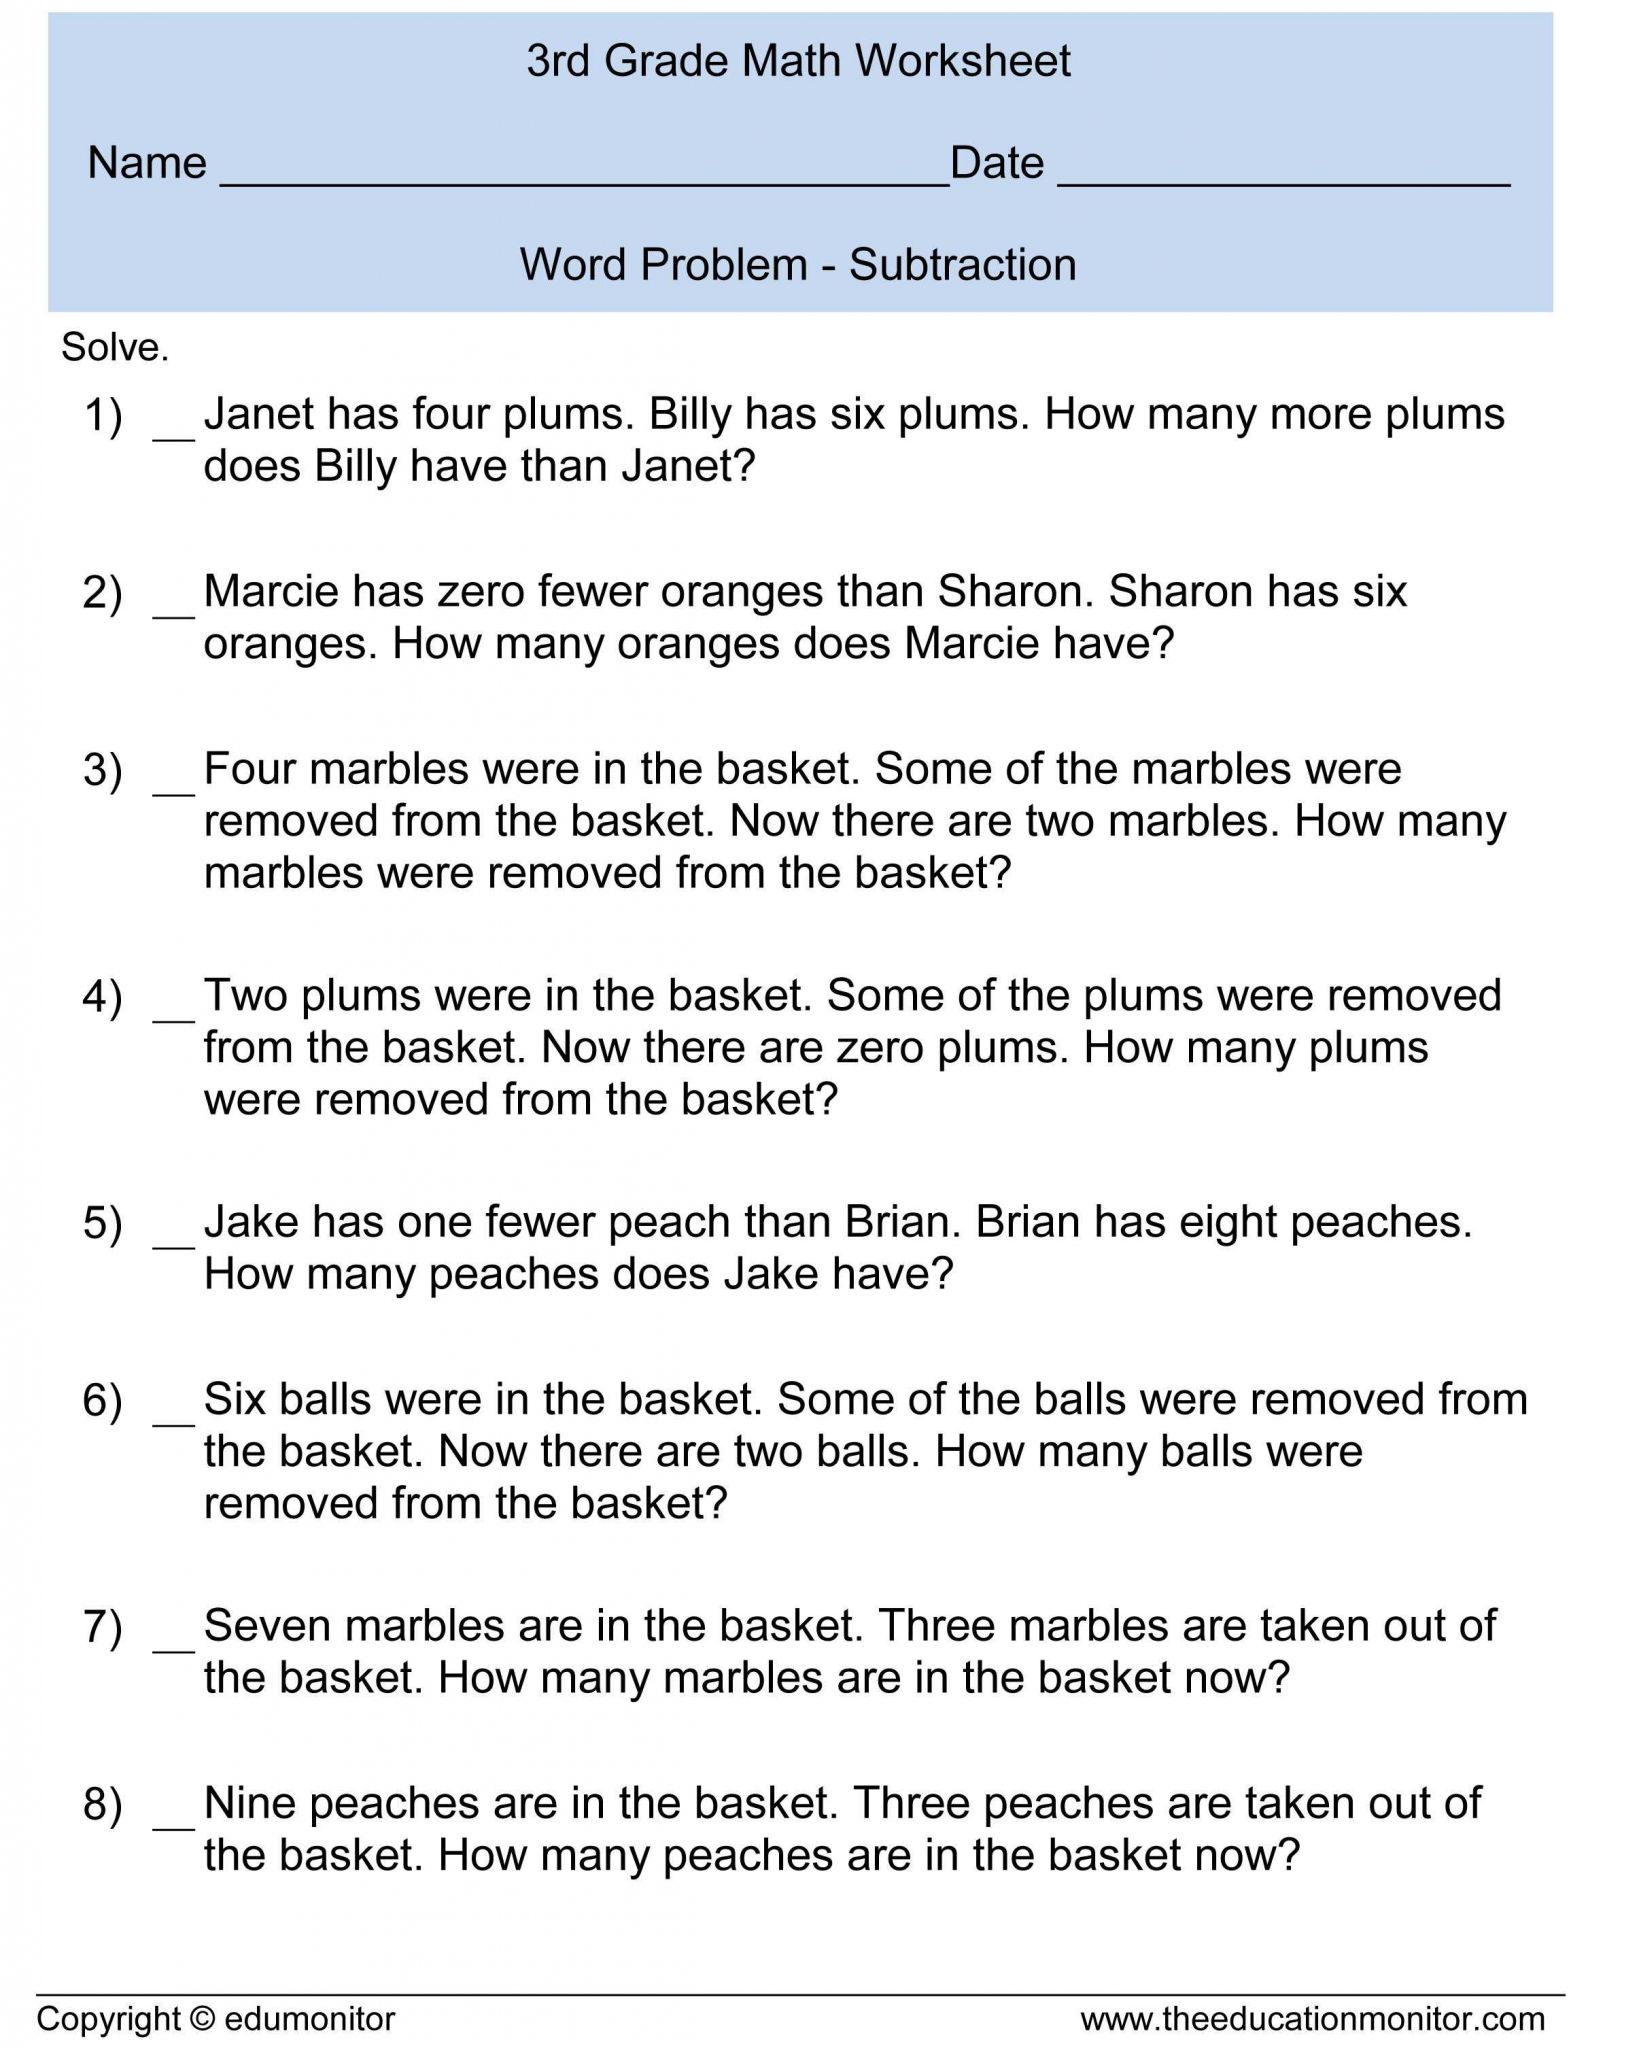 Proportion Word Problems Worksheet 7th Grade as Well as Math Word Problems Practice Worksheets Refrence Free Printable 3rd